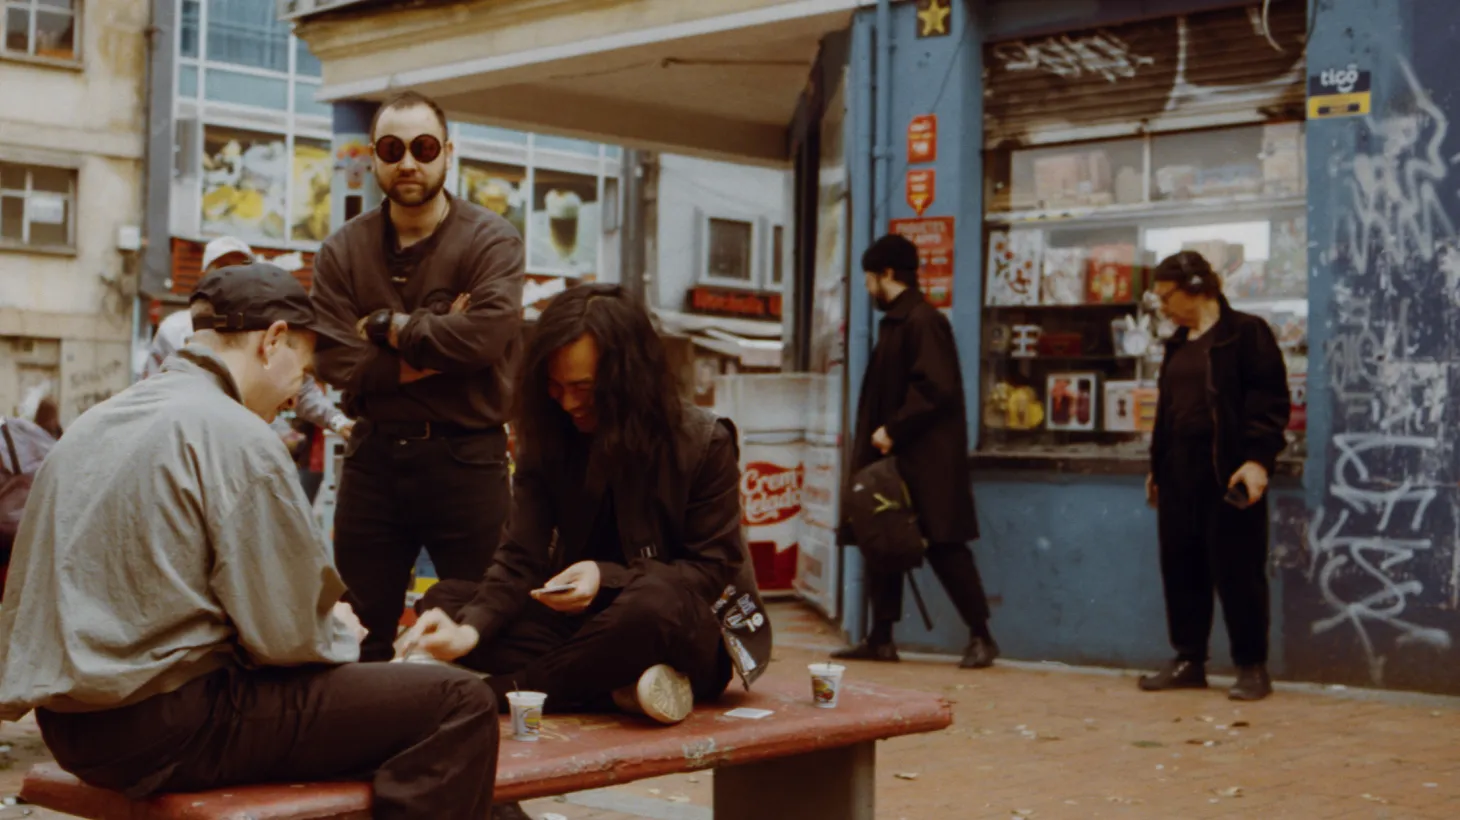 With a double LP, V, dropping mid-March, Unknown Mortal Orchestra have been teasing out delicious tracks, including “Layla.” We are excited to experience this hefty release and can imagine this album making many year-end lists.